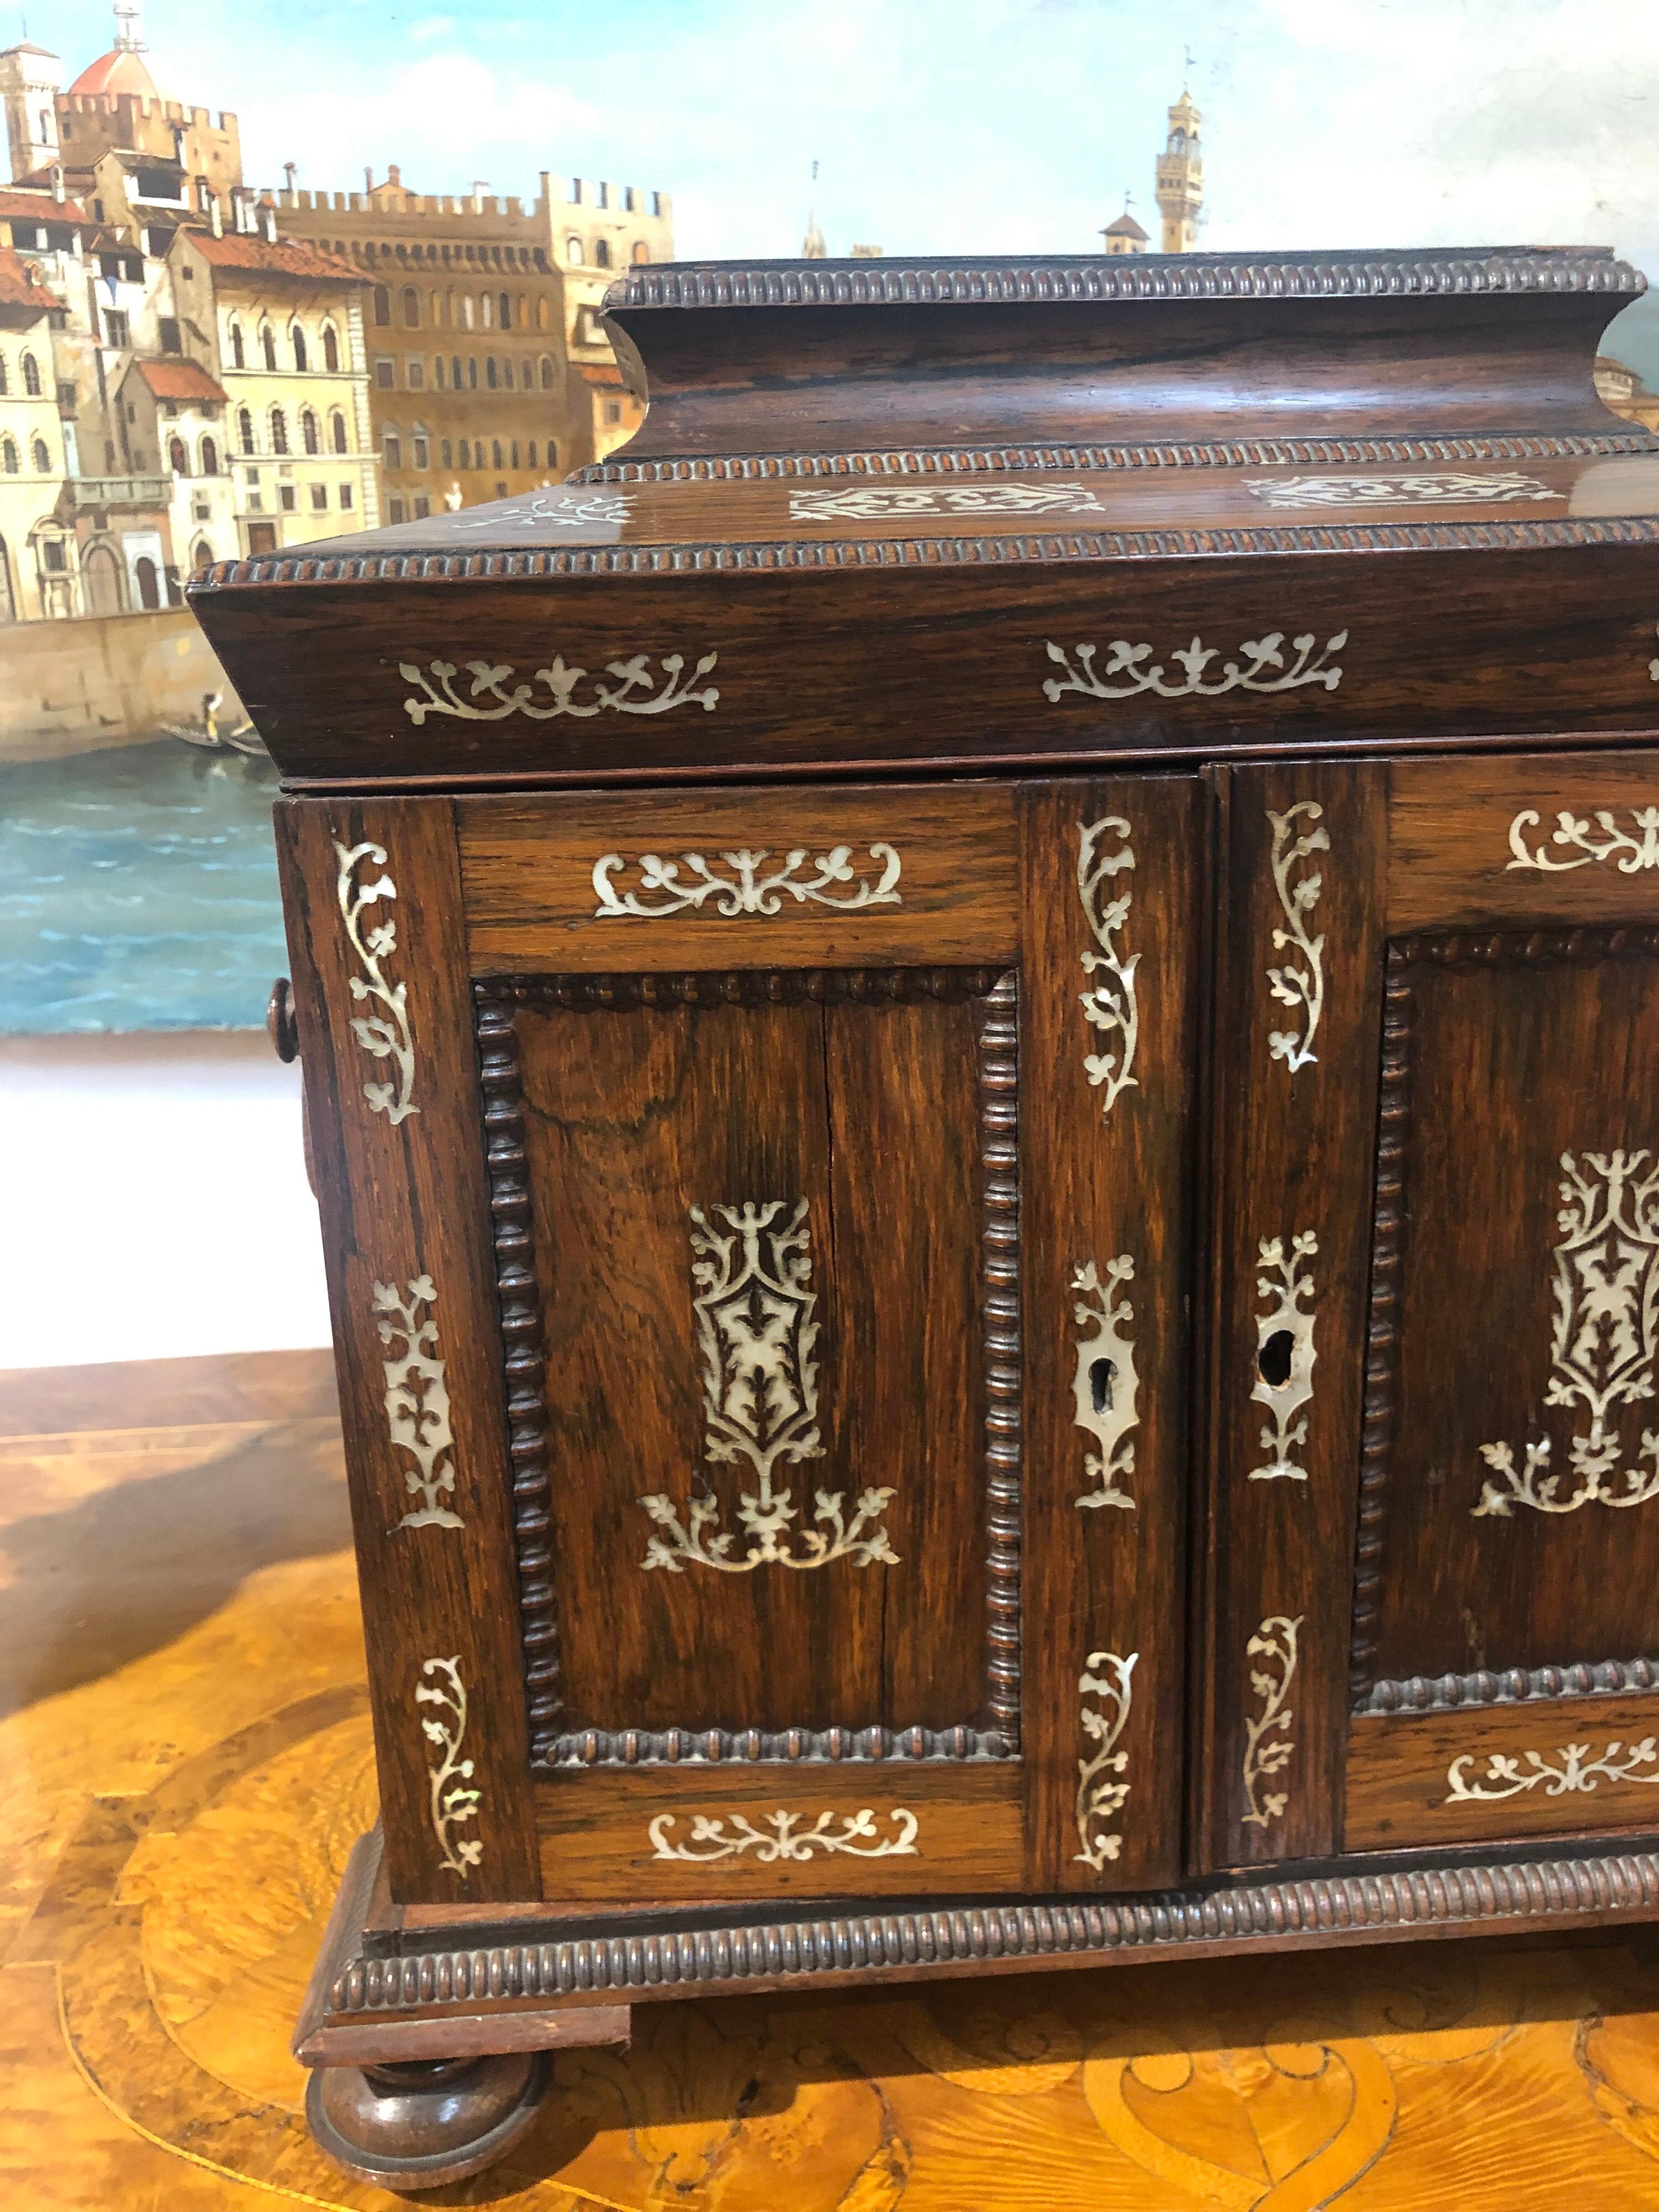 Beautiful antique Portuguese rosewood table cabinet with inlaid bone The inside of the box has a mirror and several small drawers. Lovely intricate details. Would make an excellent jewelry box for that special someone!